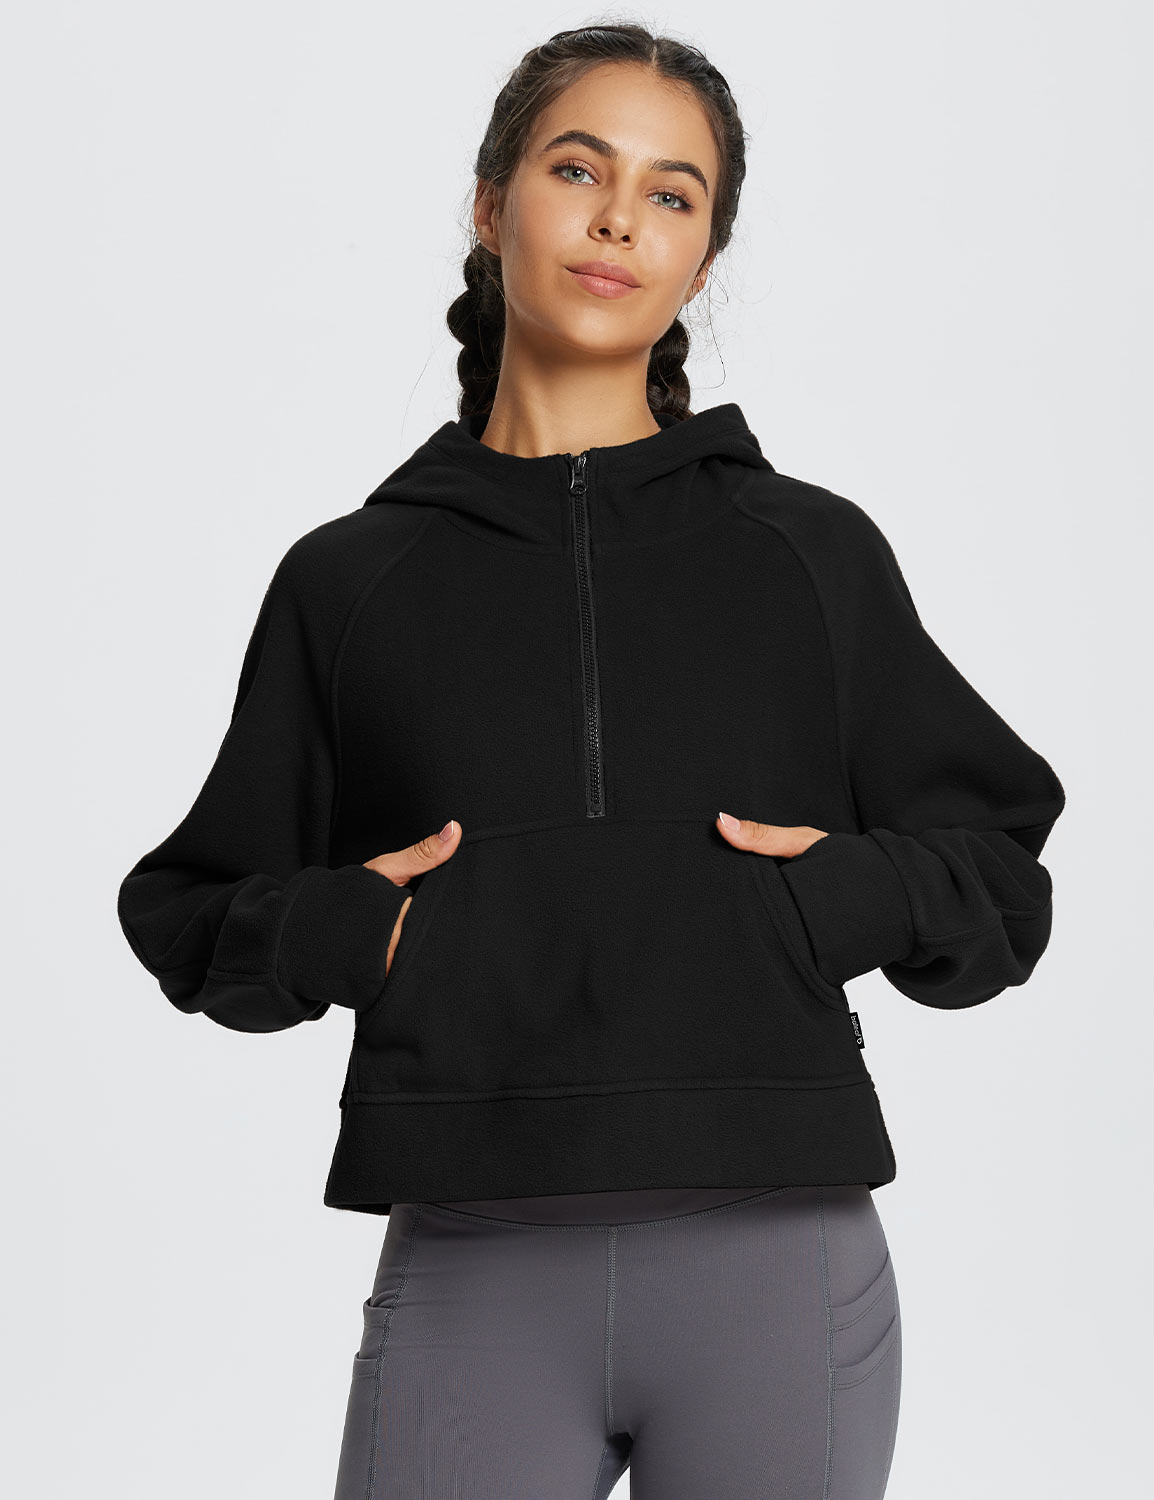 Baleaf Women's Thermal Hooded Cropped Pullover dbd083 Black Main